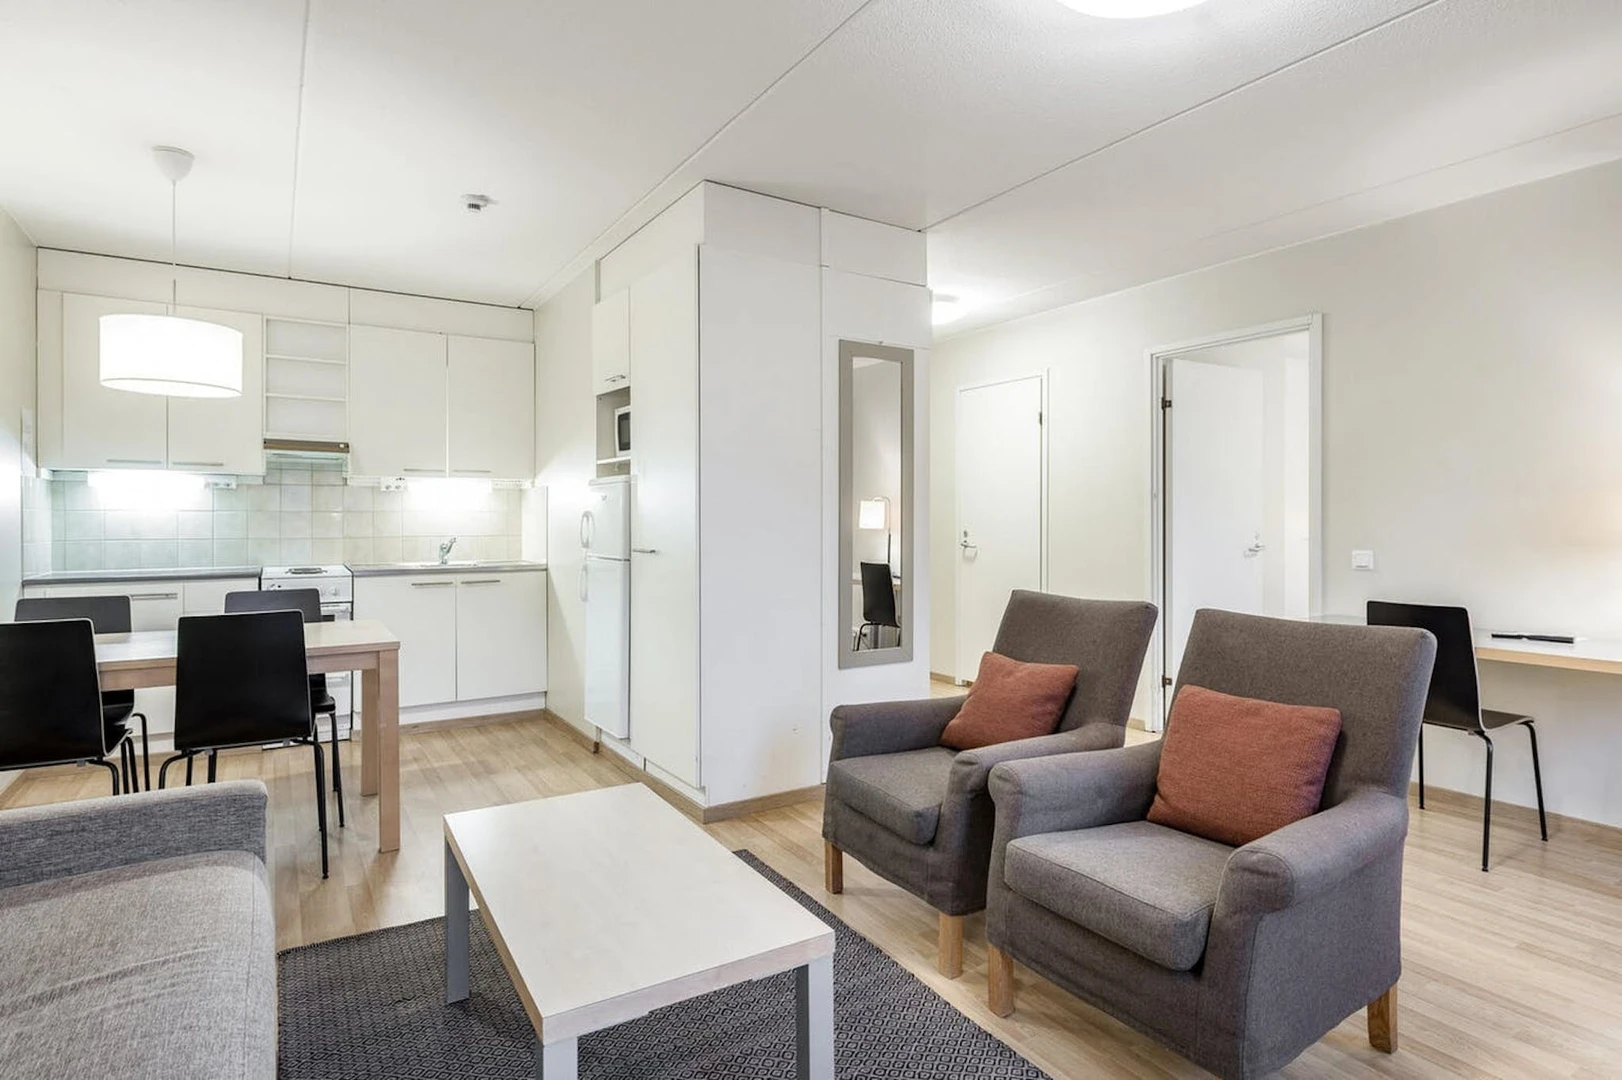 Two bedroom accommodation in Espoo